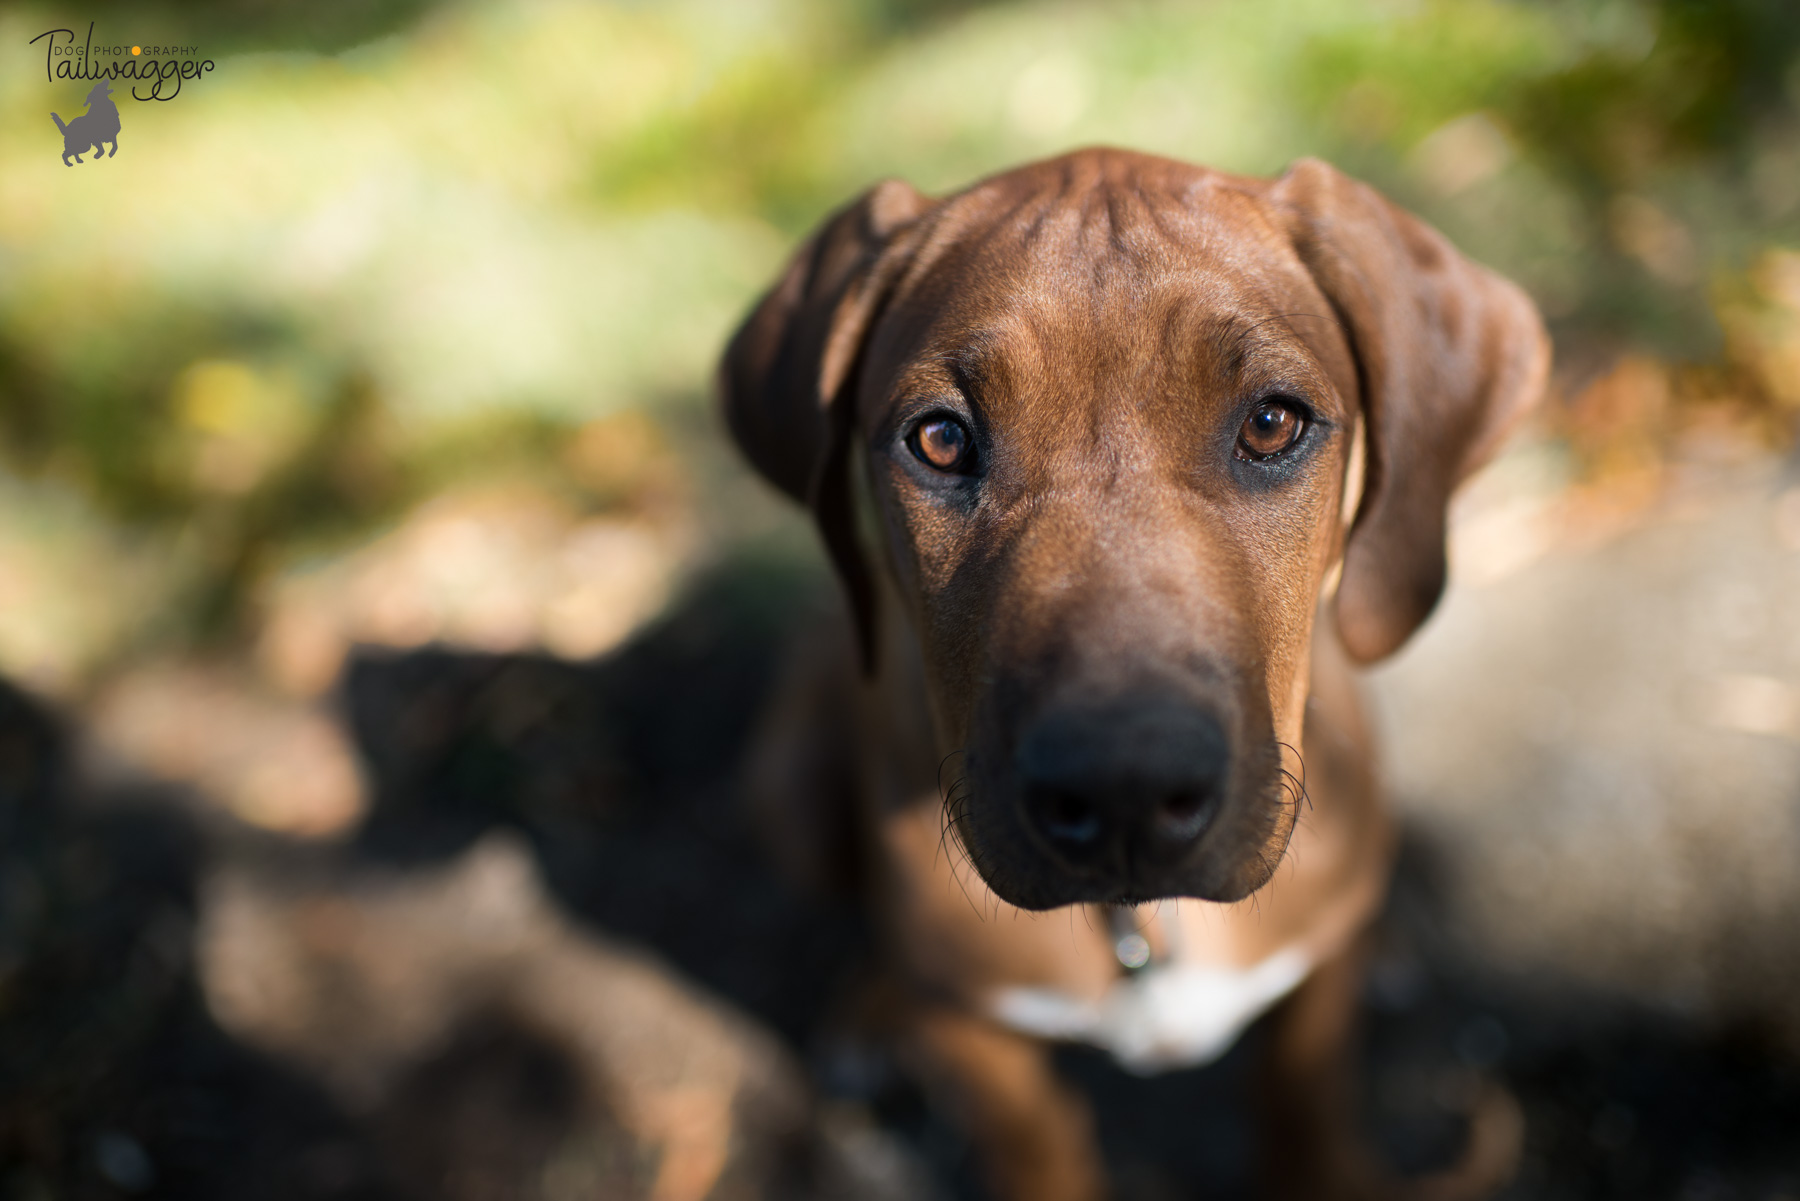 A Rhodesian Ridgeback puppy stares up into the camera.